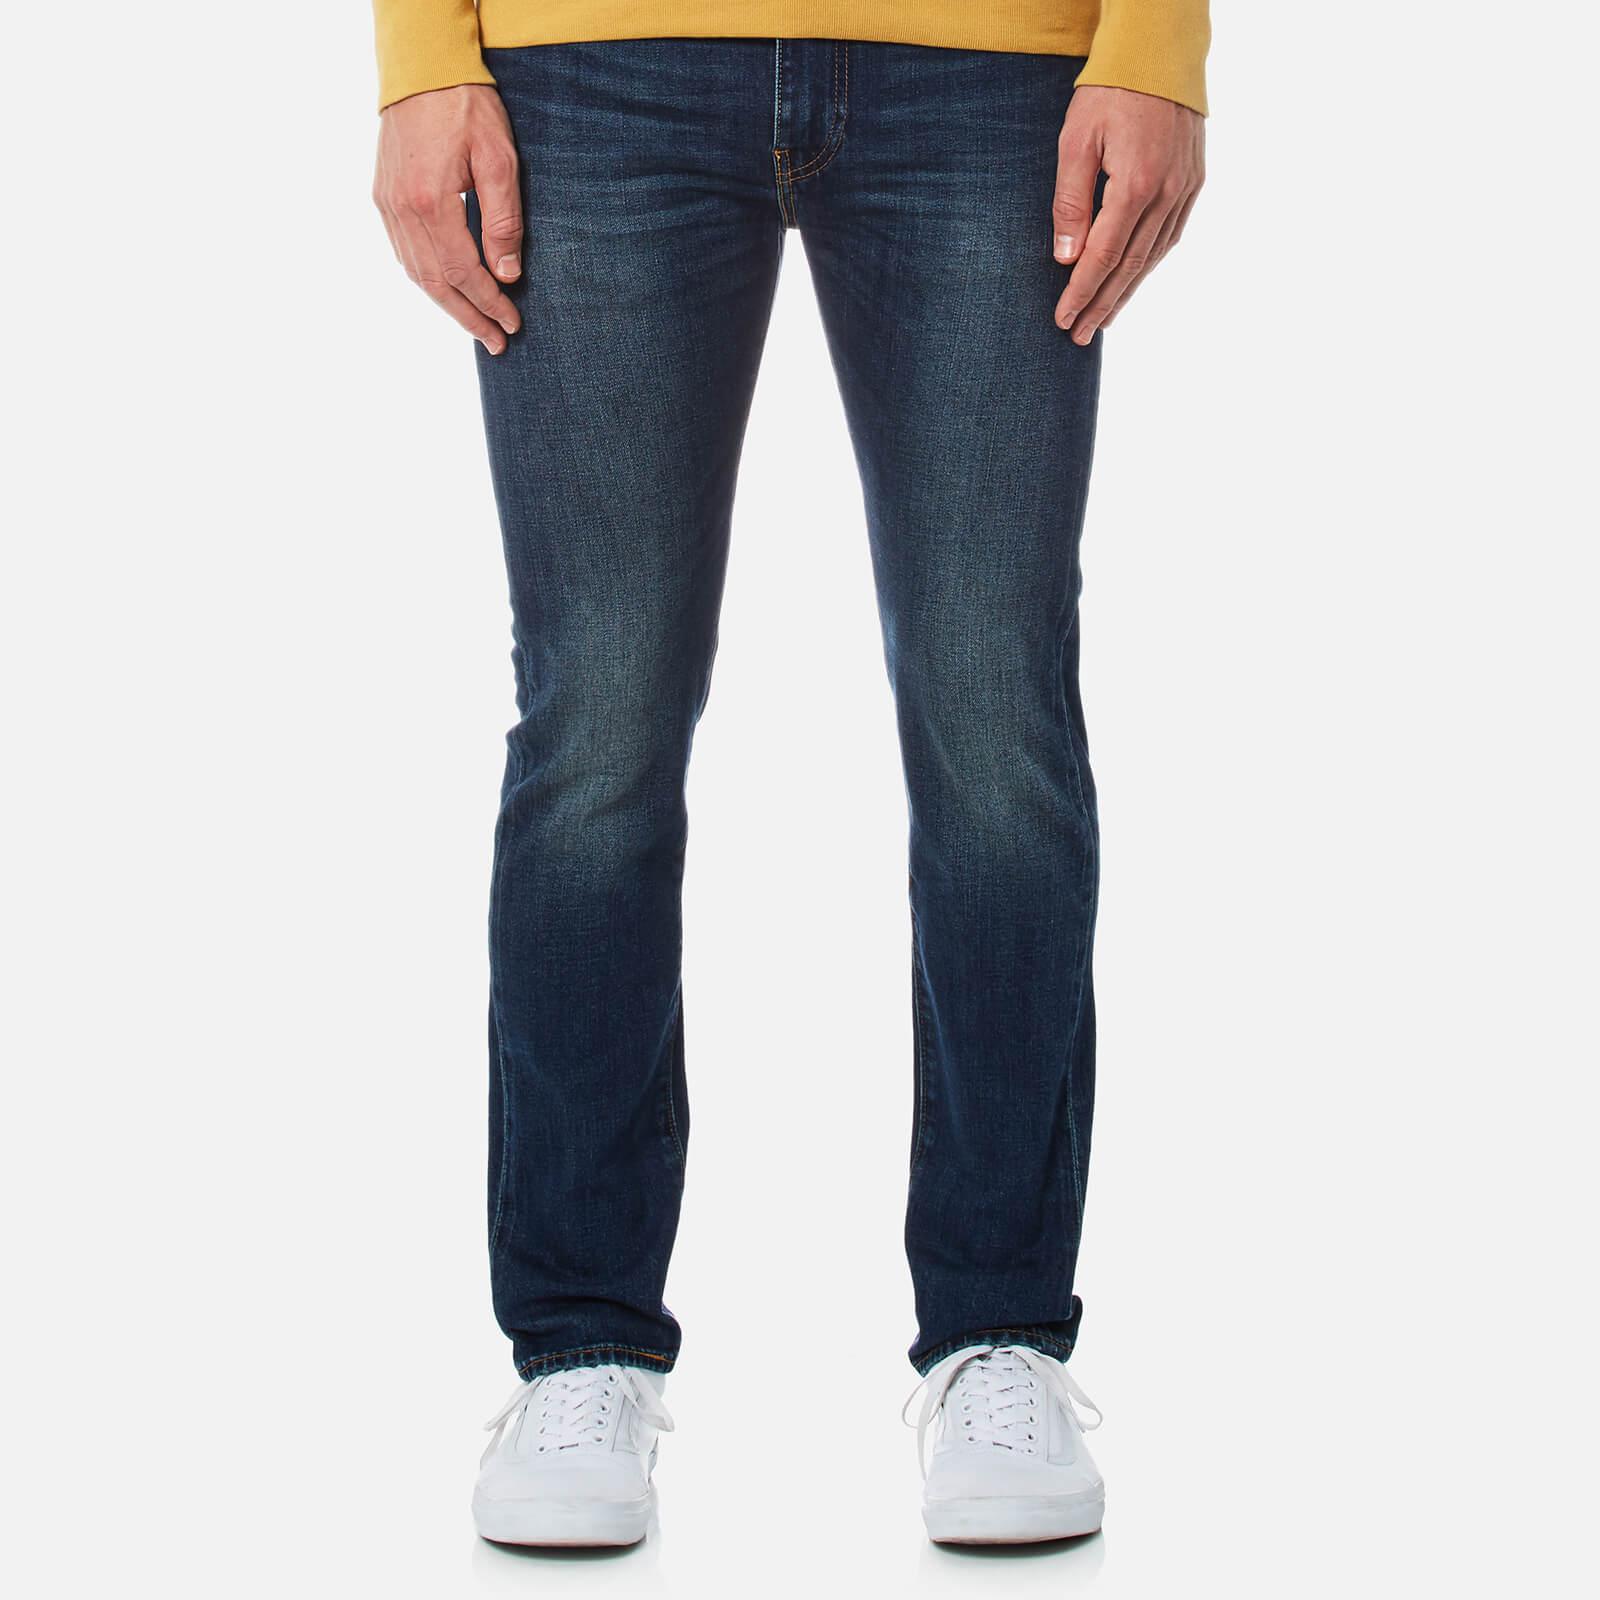 Levi's 510 Skinny Fit Jeans in Blue for Men - Lyst